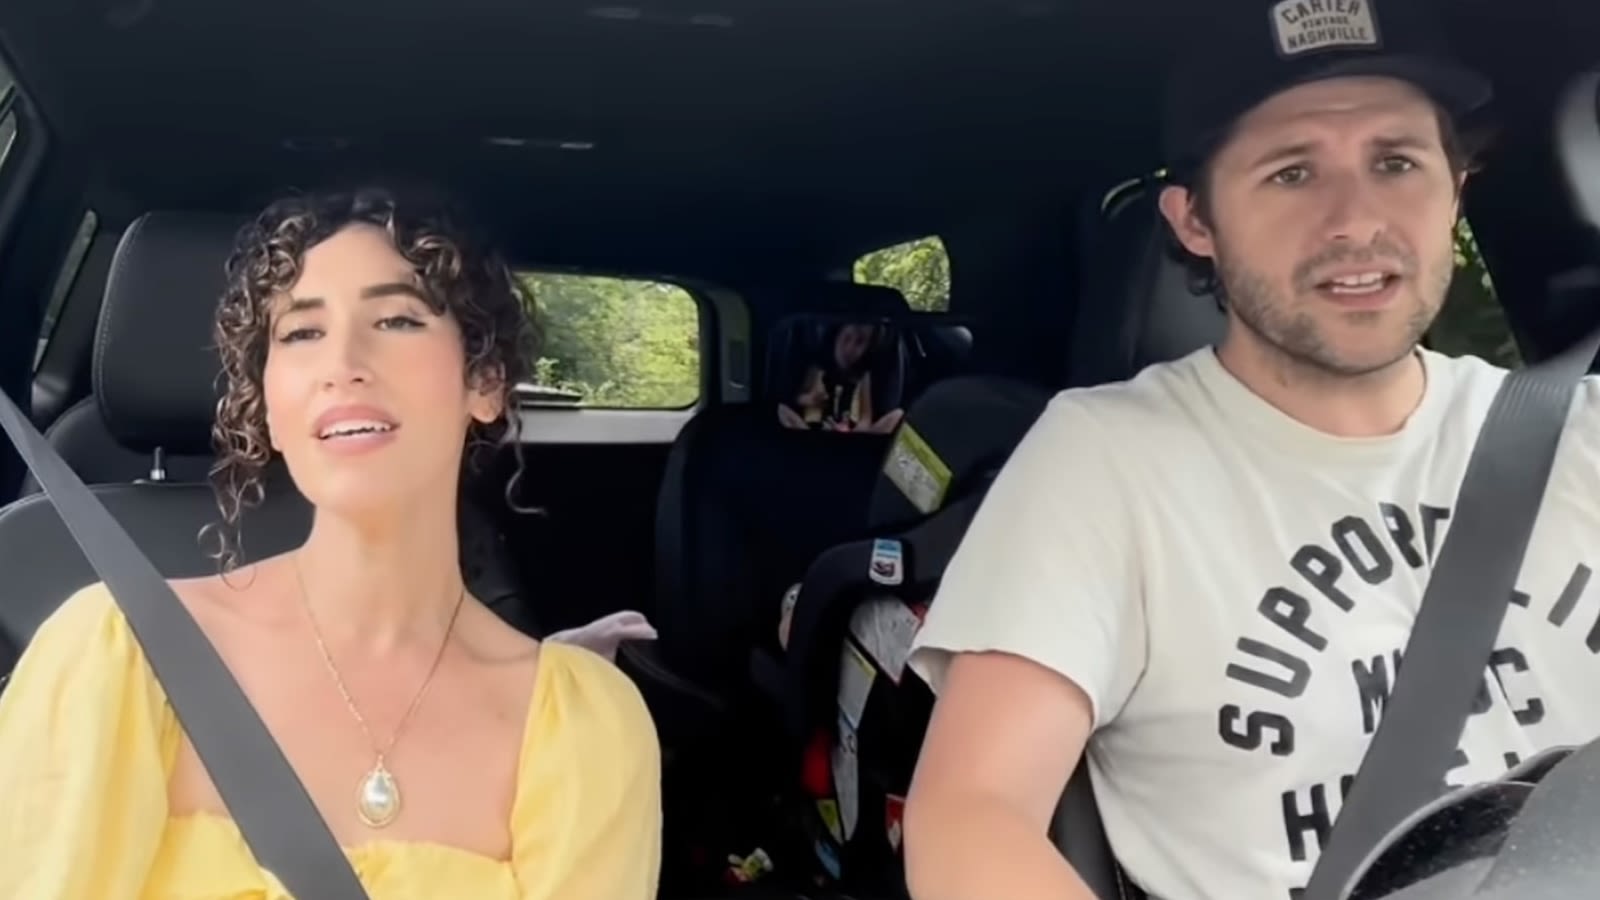 Couple sing full Disney performances for toddler in viral videos